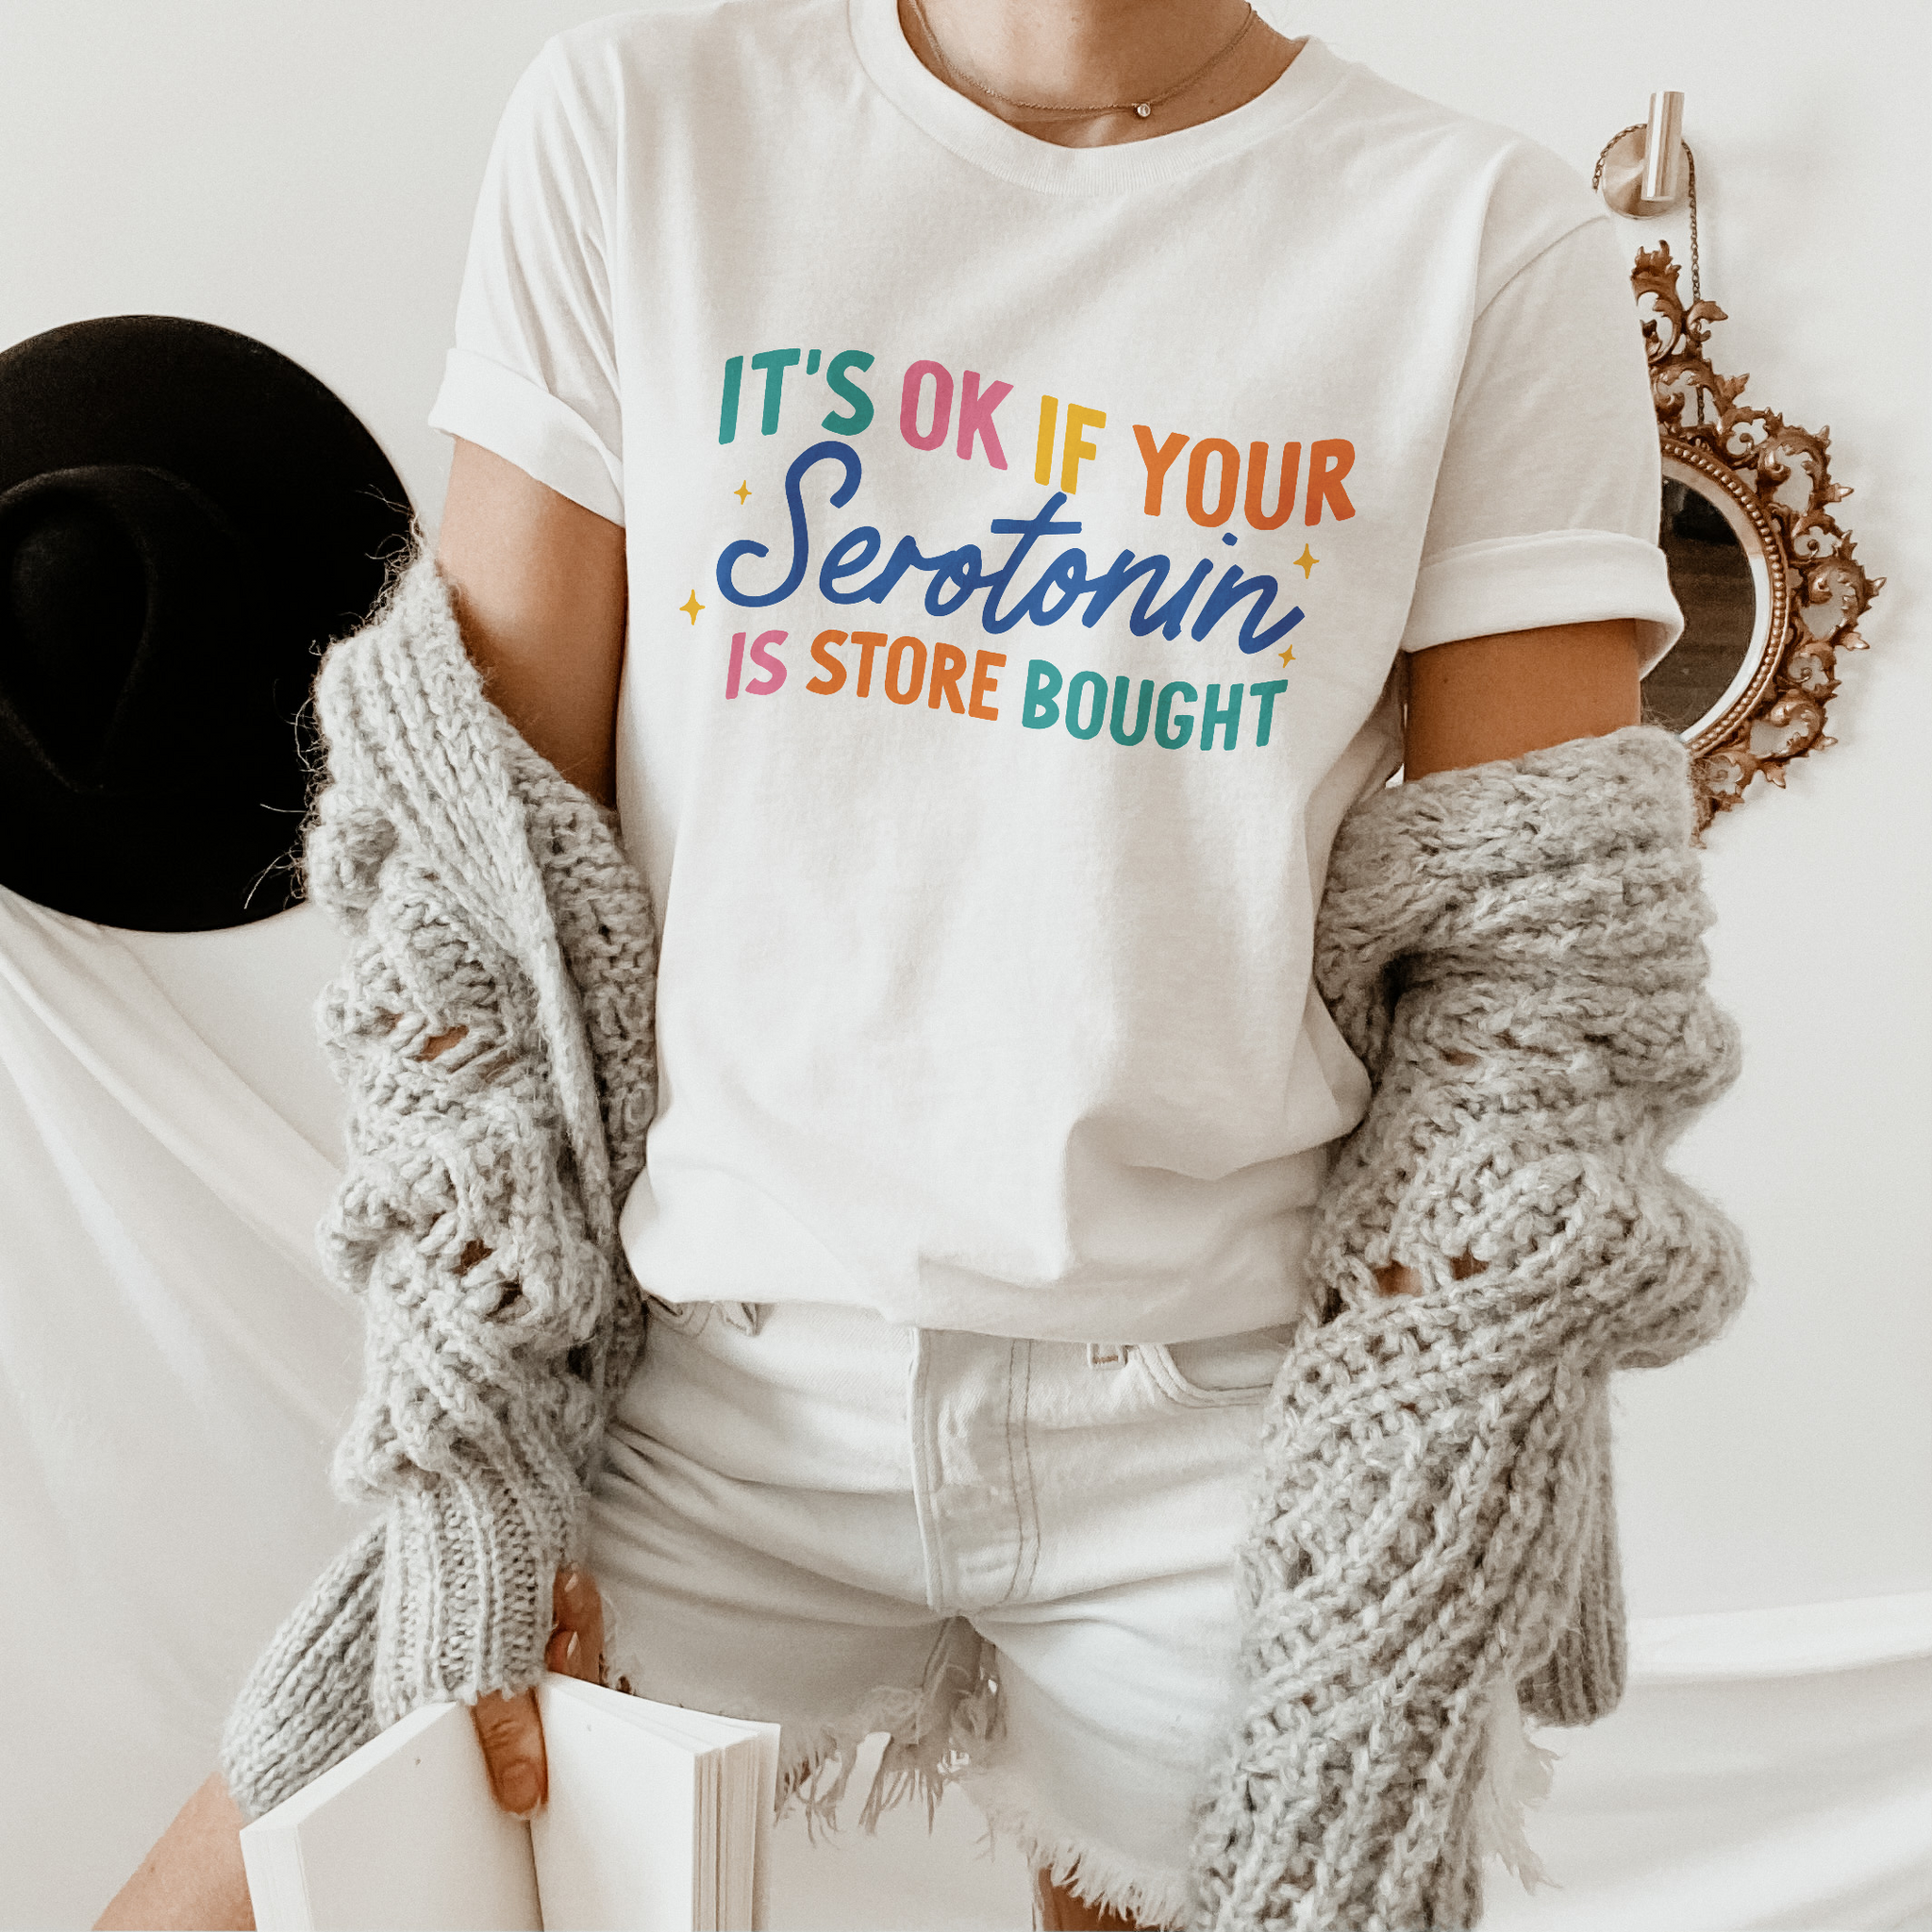 It's Ok If Your Serotonin is Store Bought Graphic Tshirt